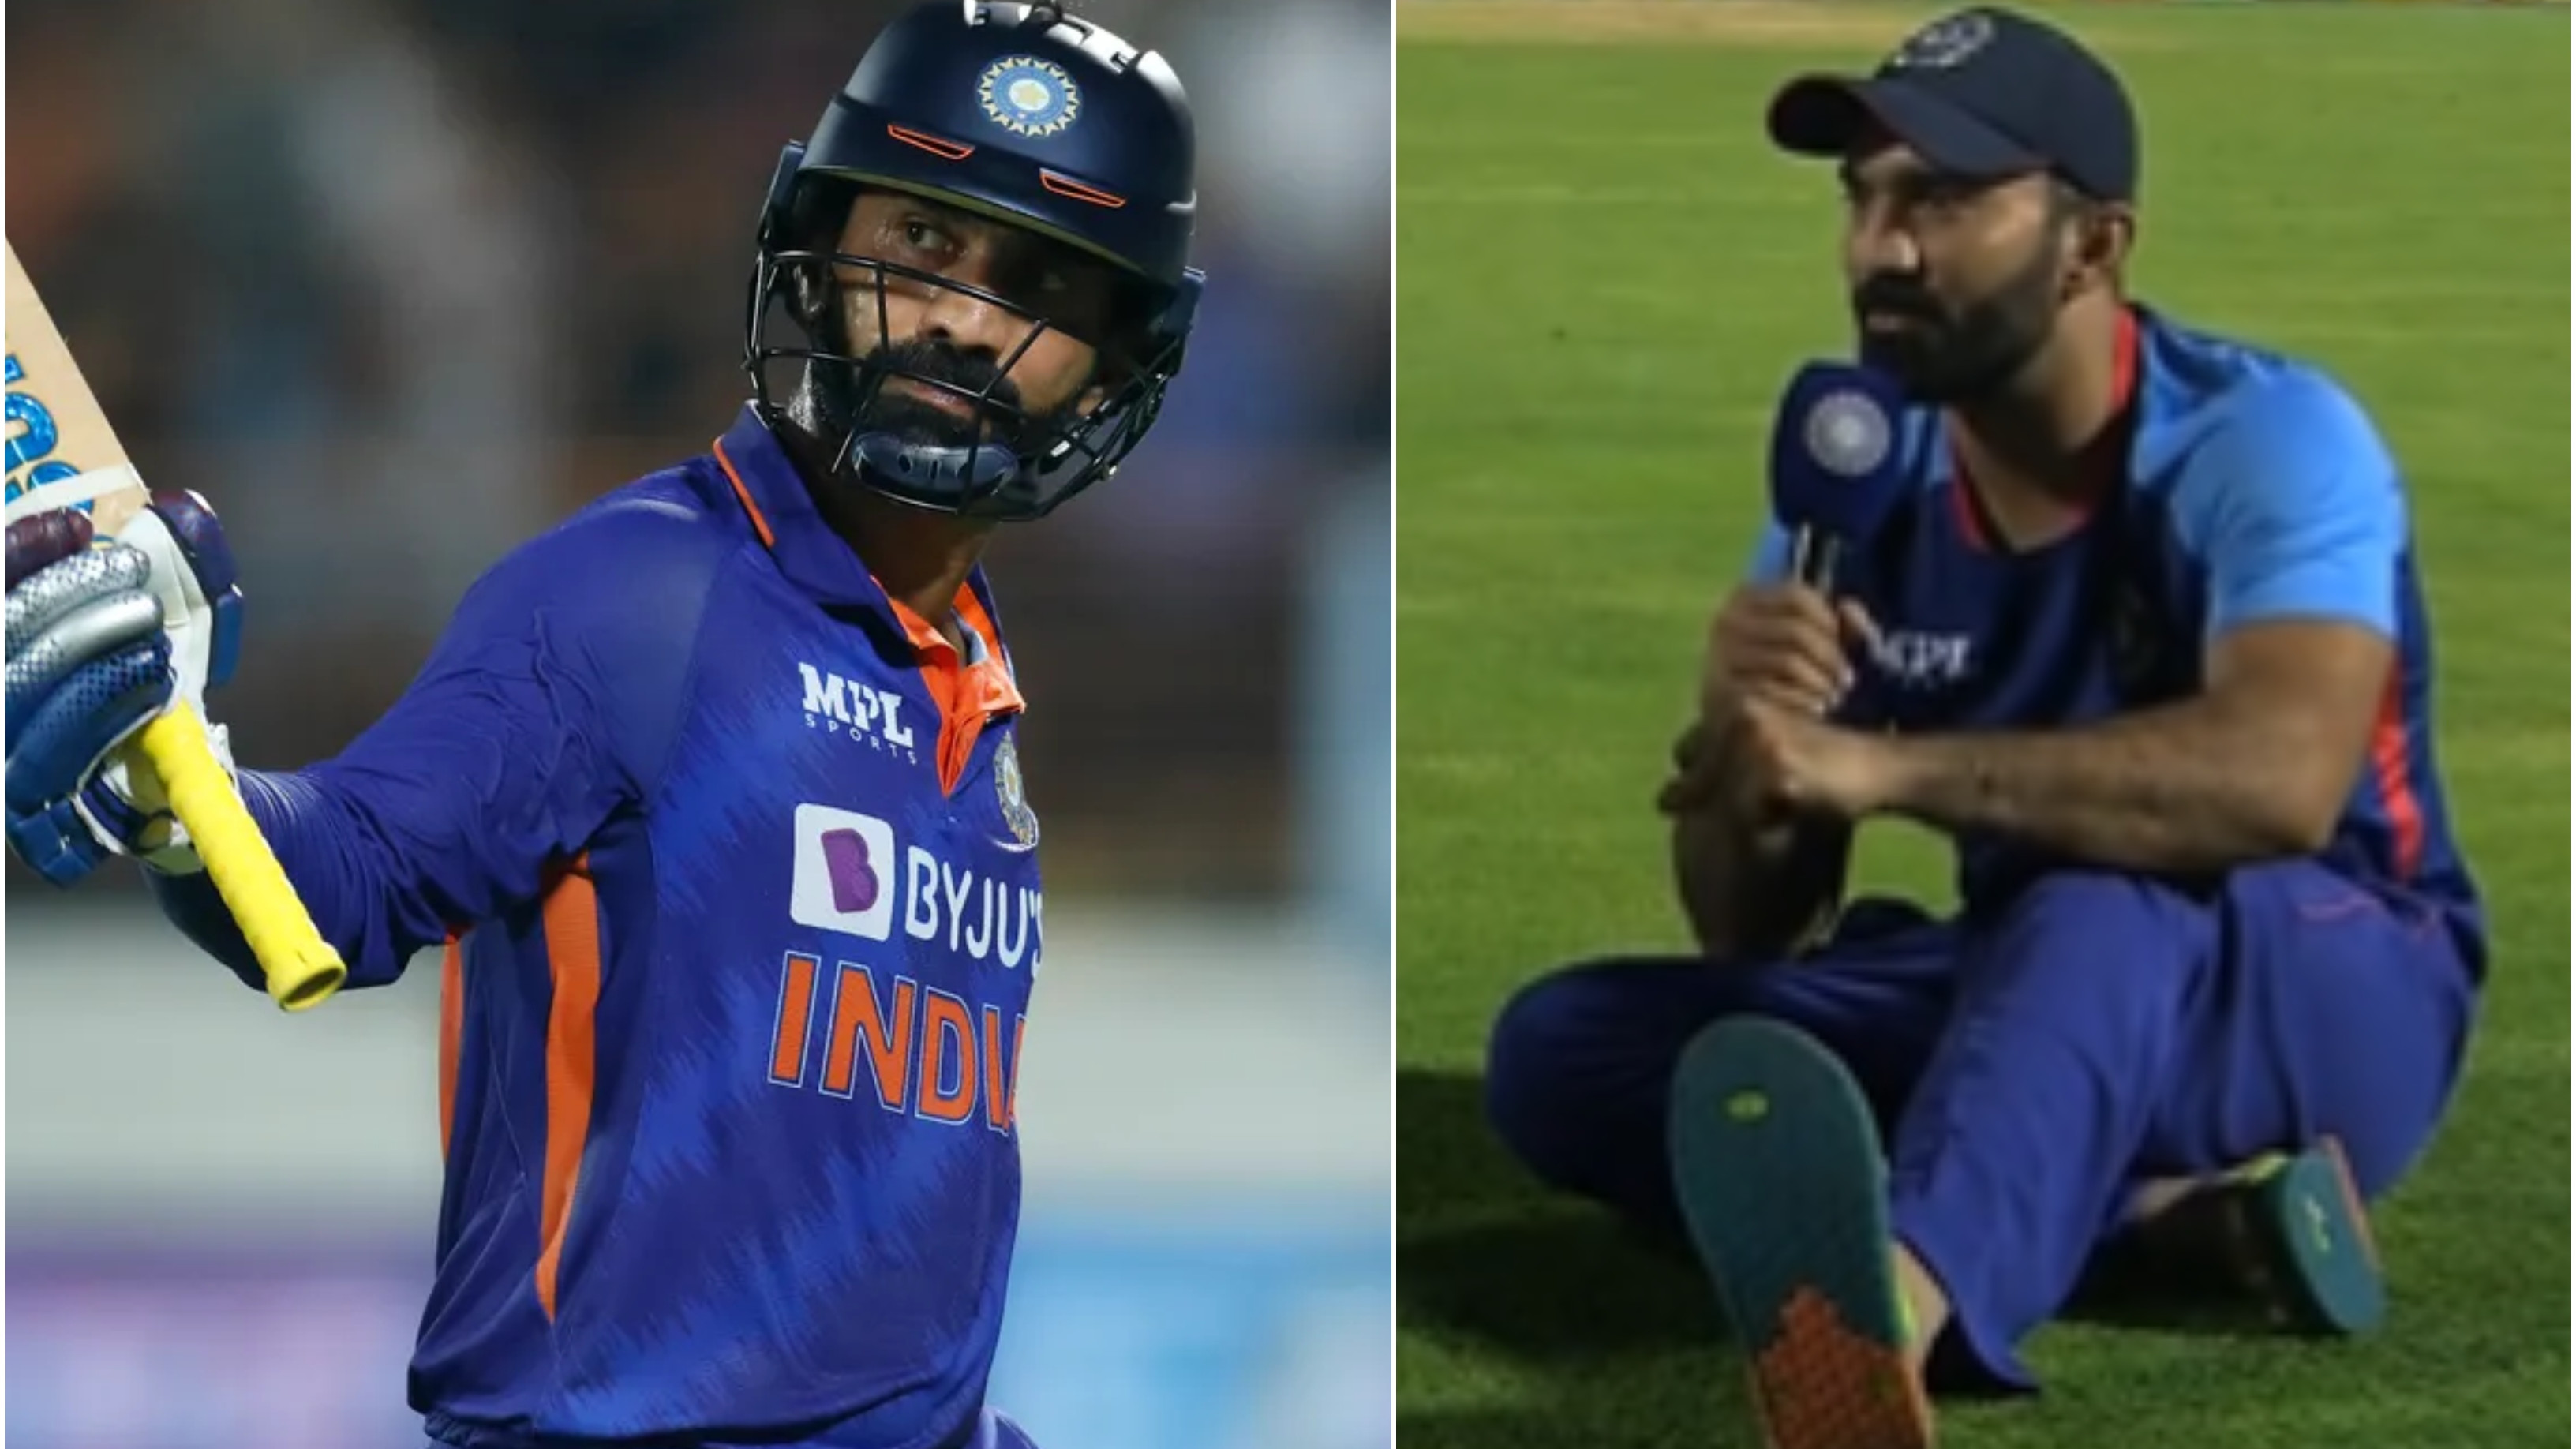 IND v SA 2022: WATCH – ‘Want to be that guy who can help Team India win tough games’, says Dinesh Karthik